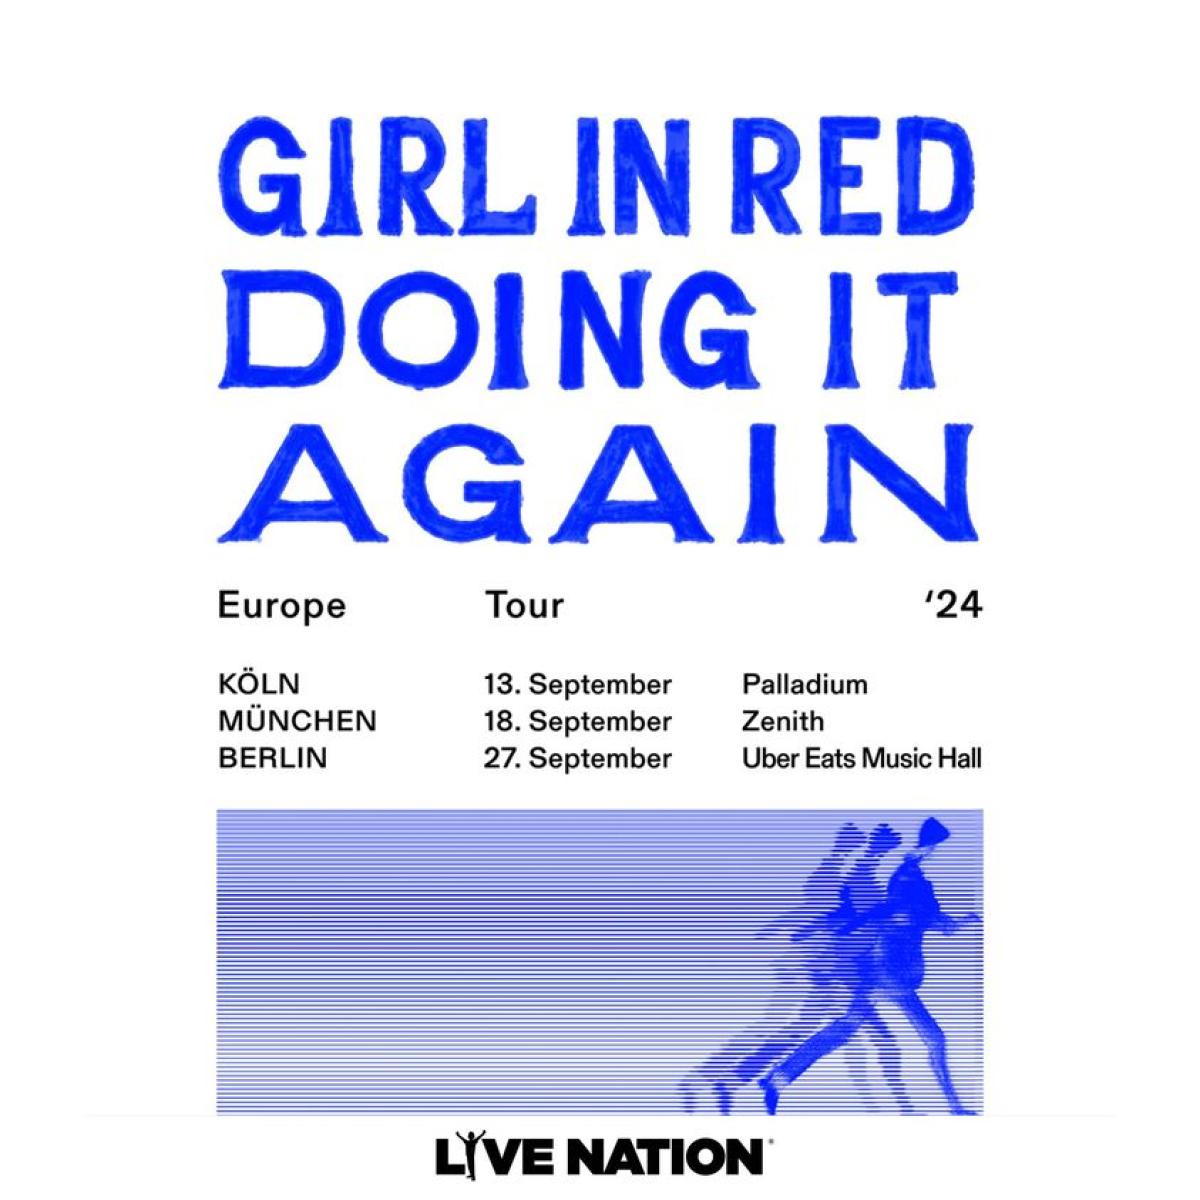 girl in red in der Uber Eats Music Hall Tickets